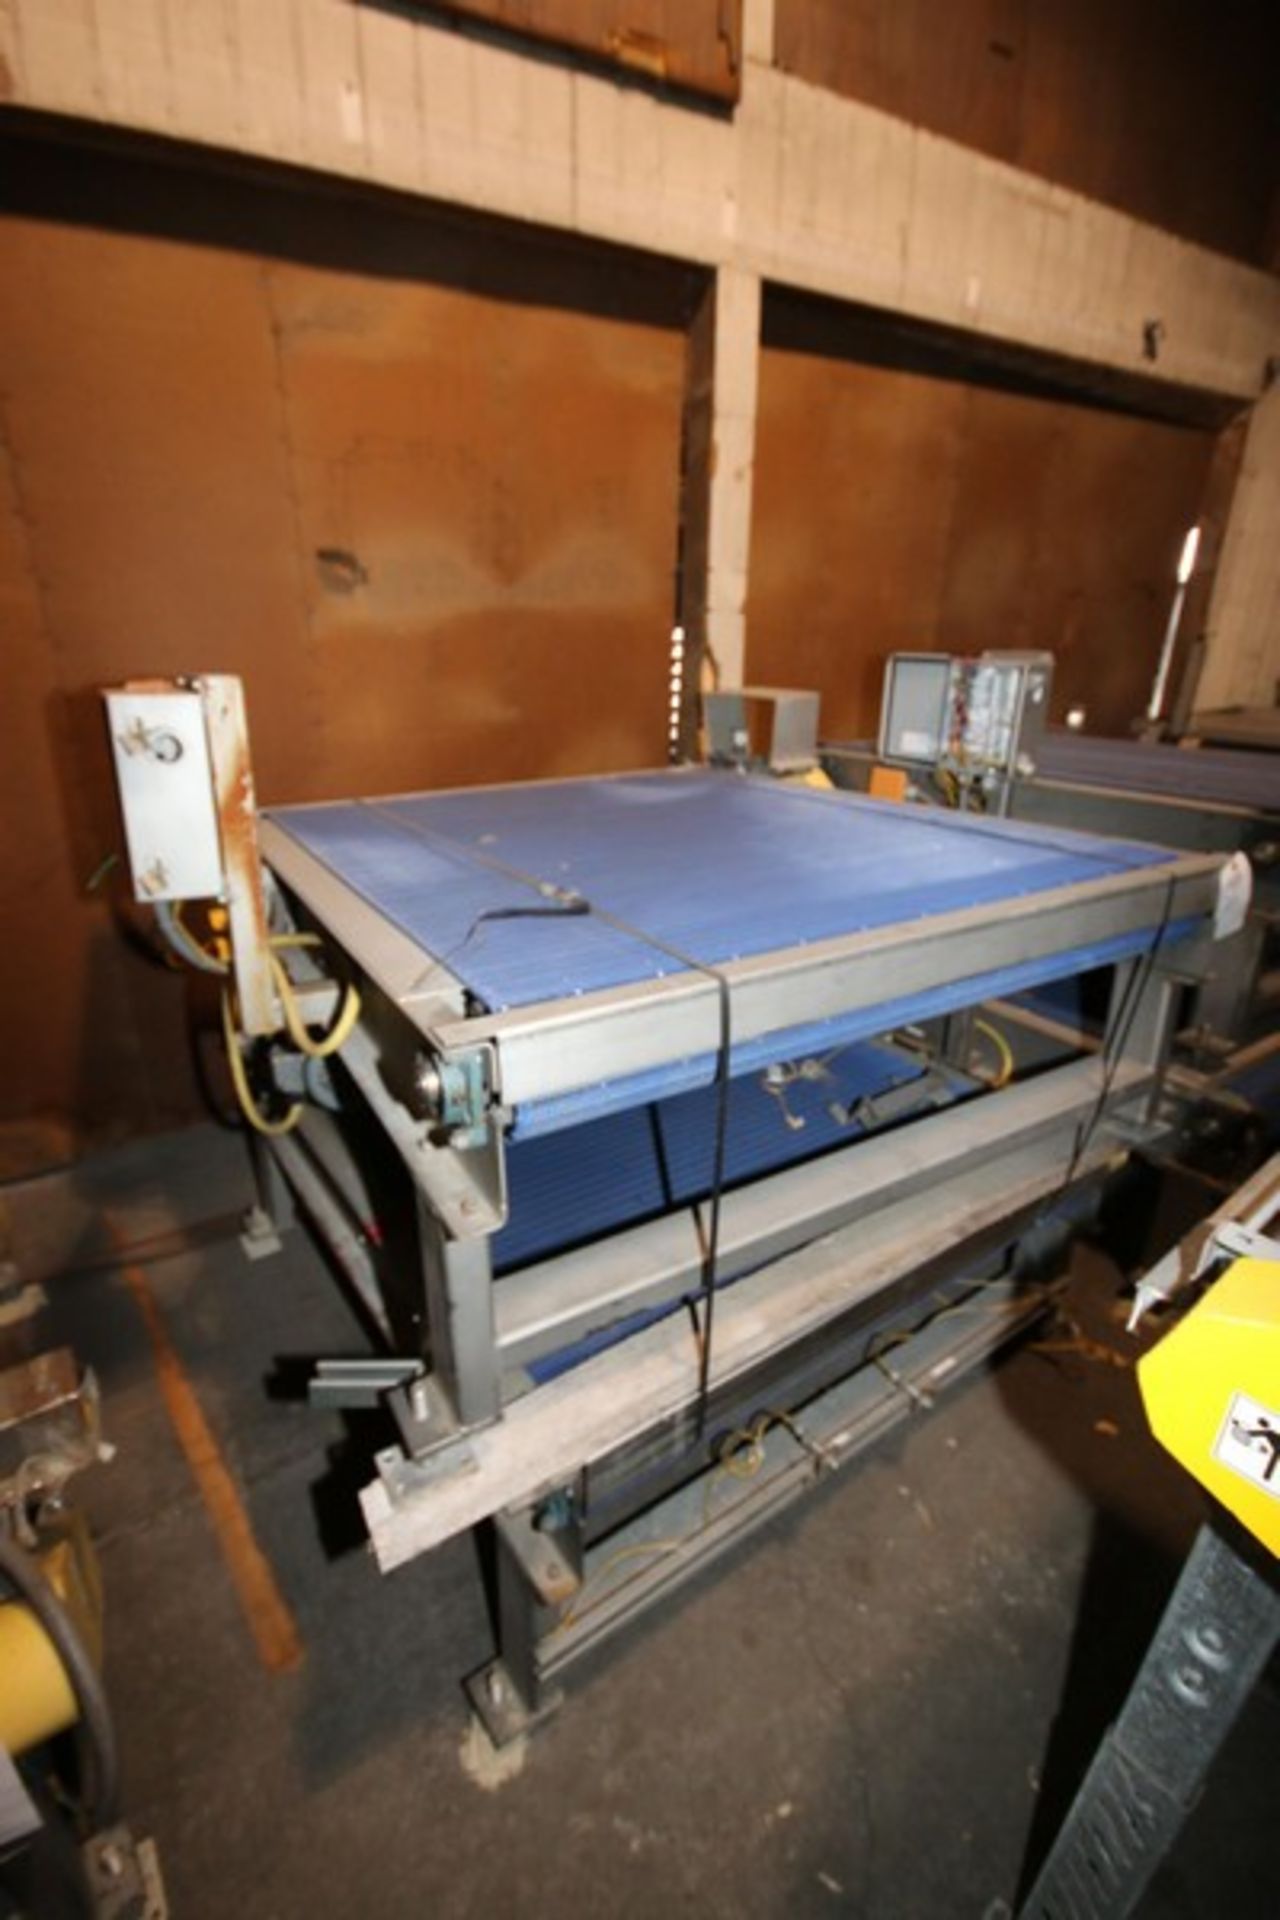 6-Sections of H&CS Conveyors, Overall Dims.: Aprox. 60" L x 64" W x 36" H, with Plastic Blue Belt, - Image 3 of 7